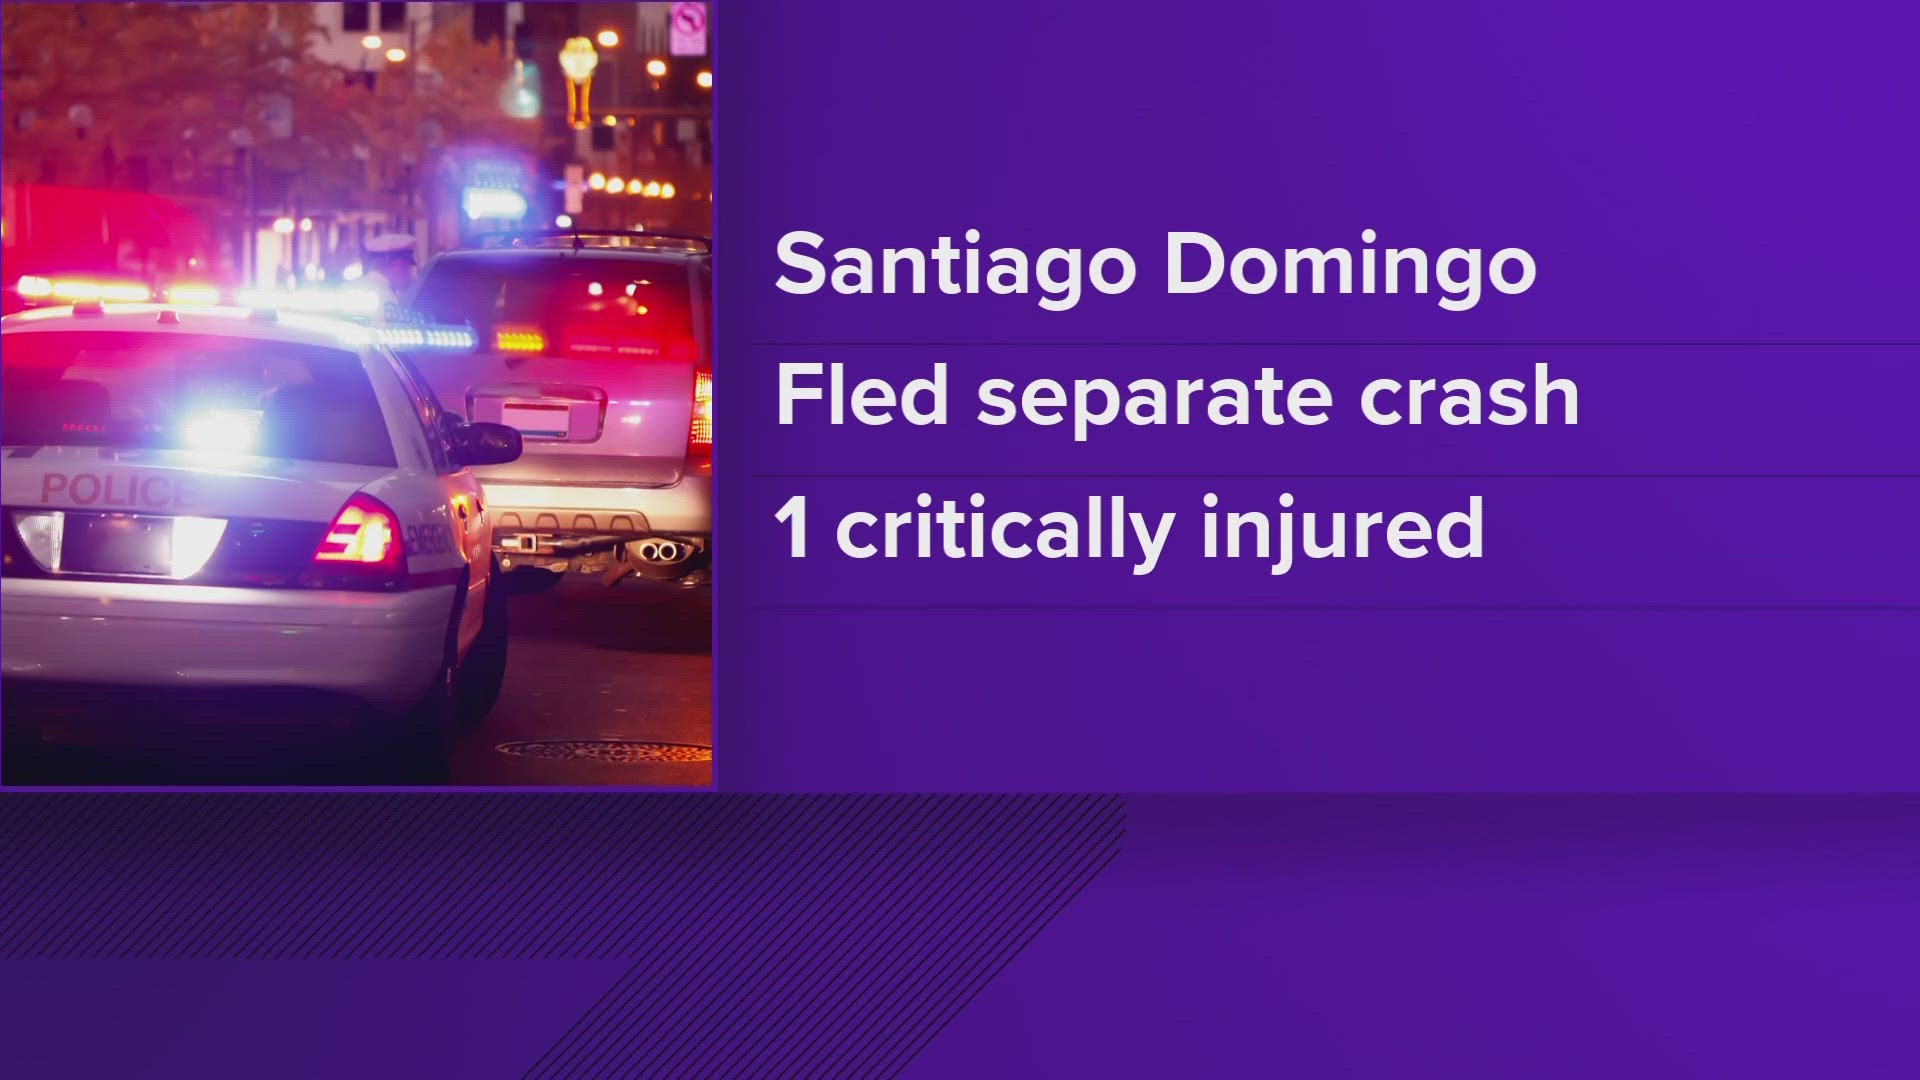 Santiago Domingo was arrested and charged with driving under the influence after fleeing the scene of a hit-and-run that injured two people.